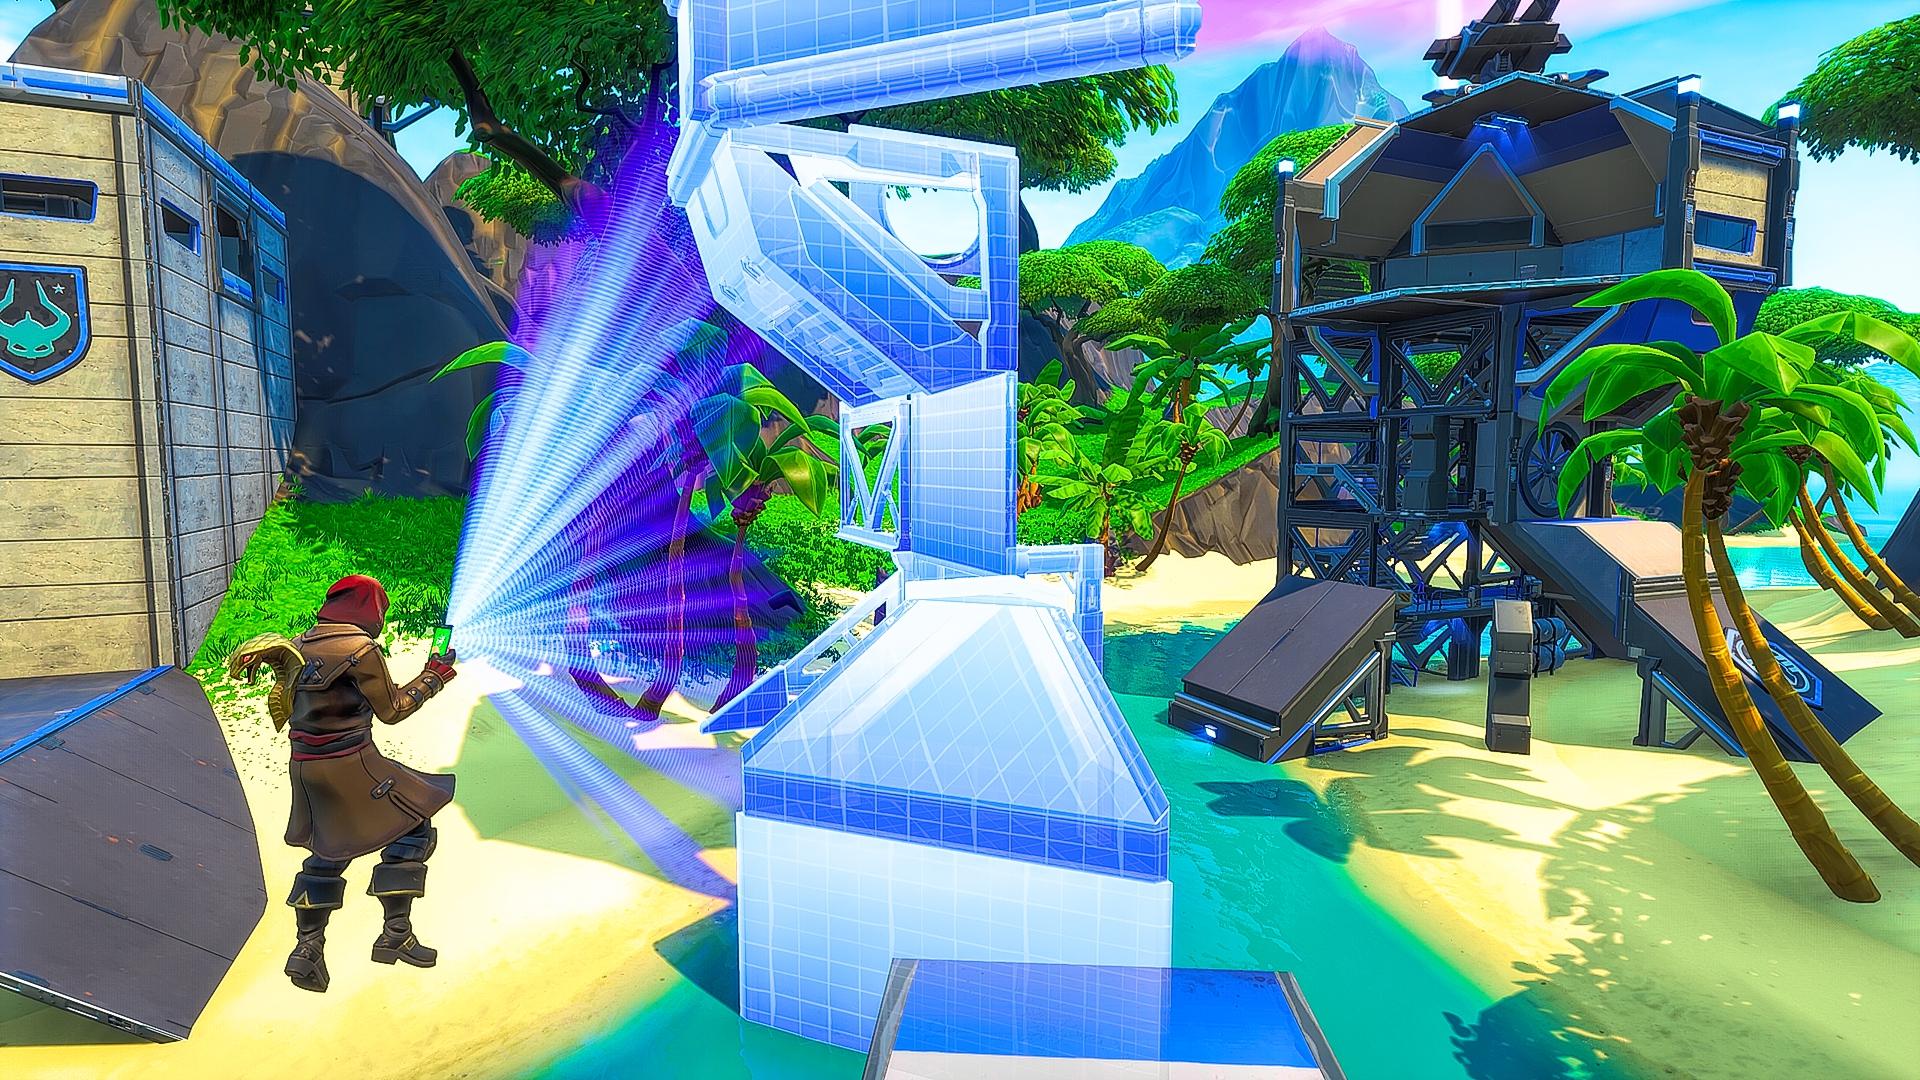 Fortnite Creative Mode Adds New Islands, MultiSelect Feature